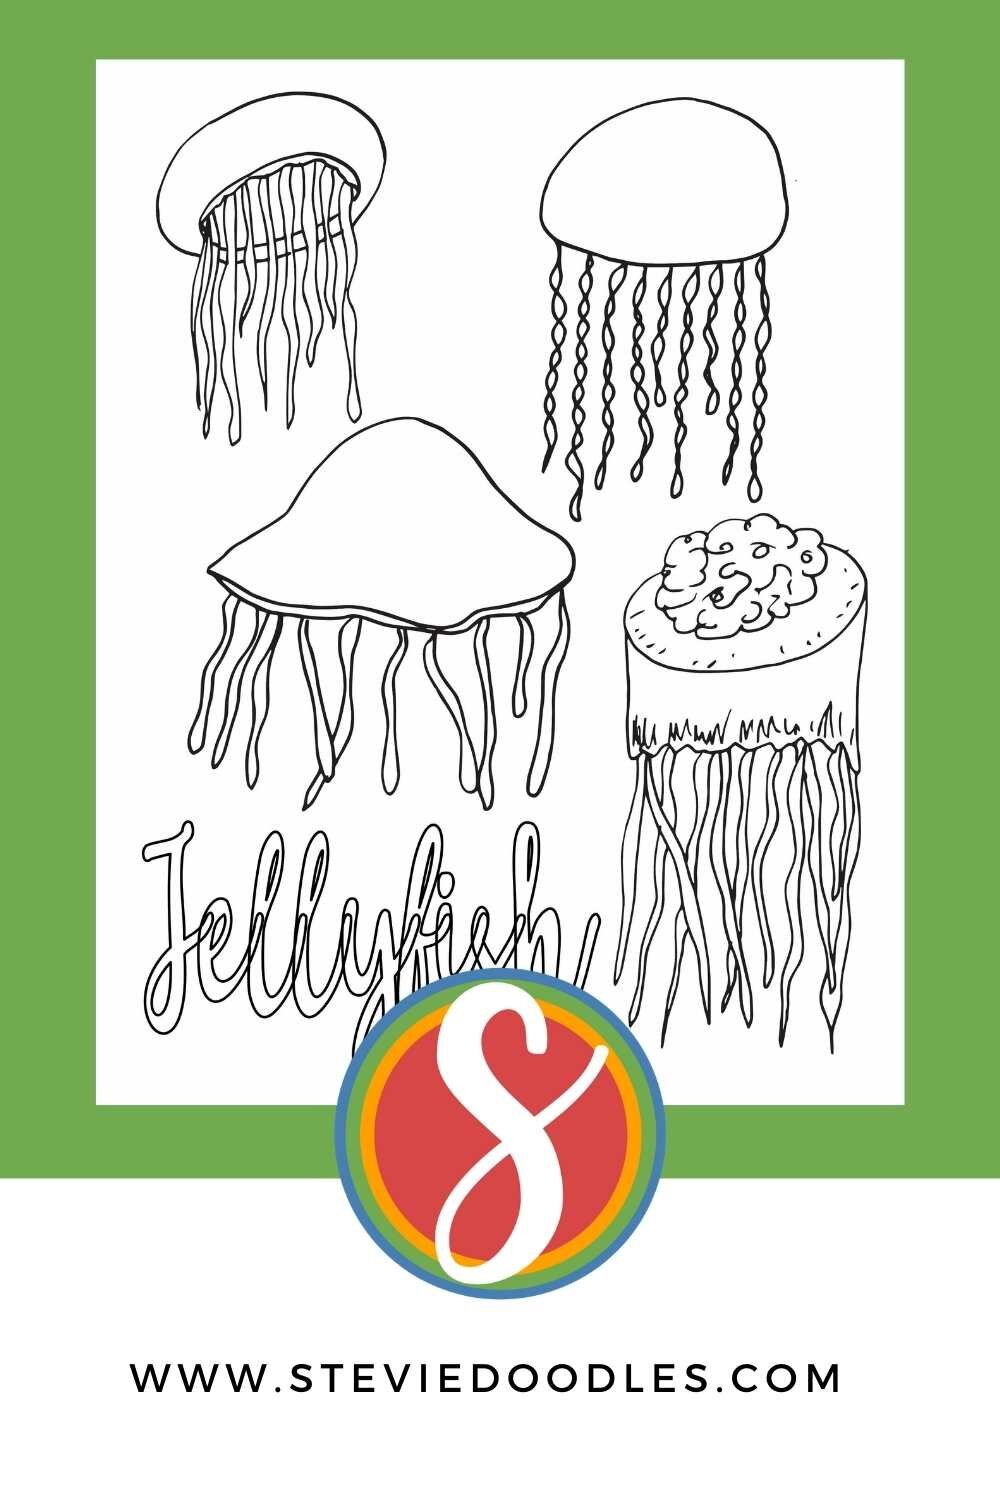 image is 4 simple jellyfish drawings to color. The colorable word "jellyfish" is printed underneath.